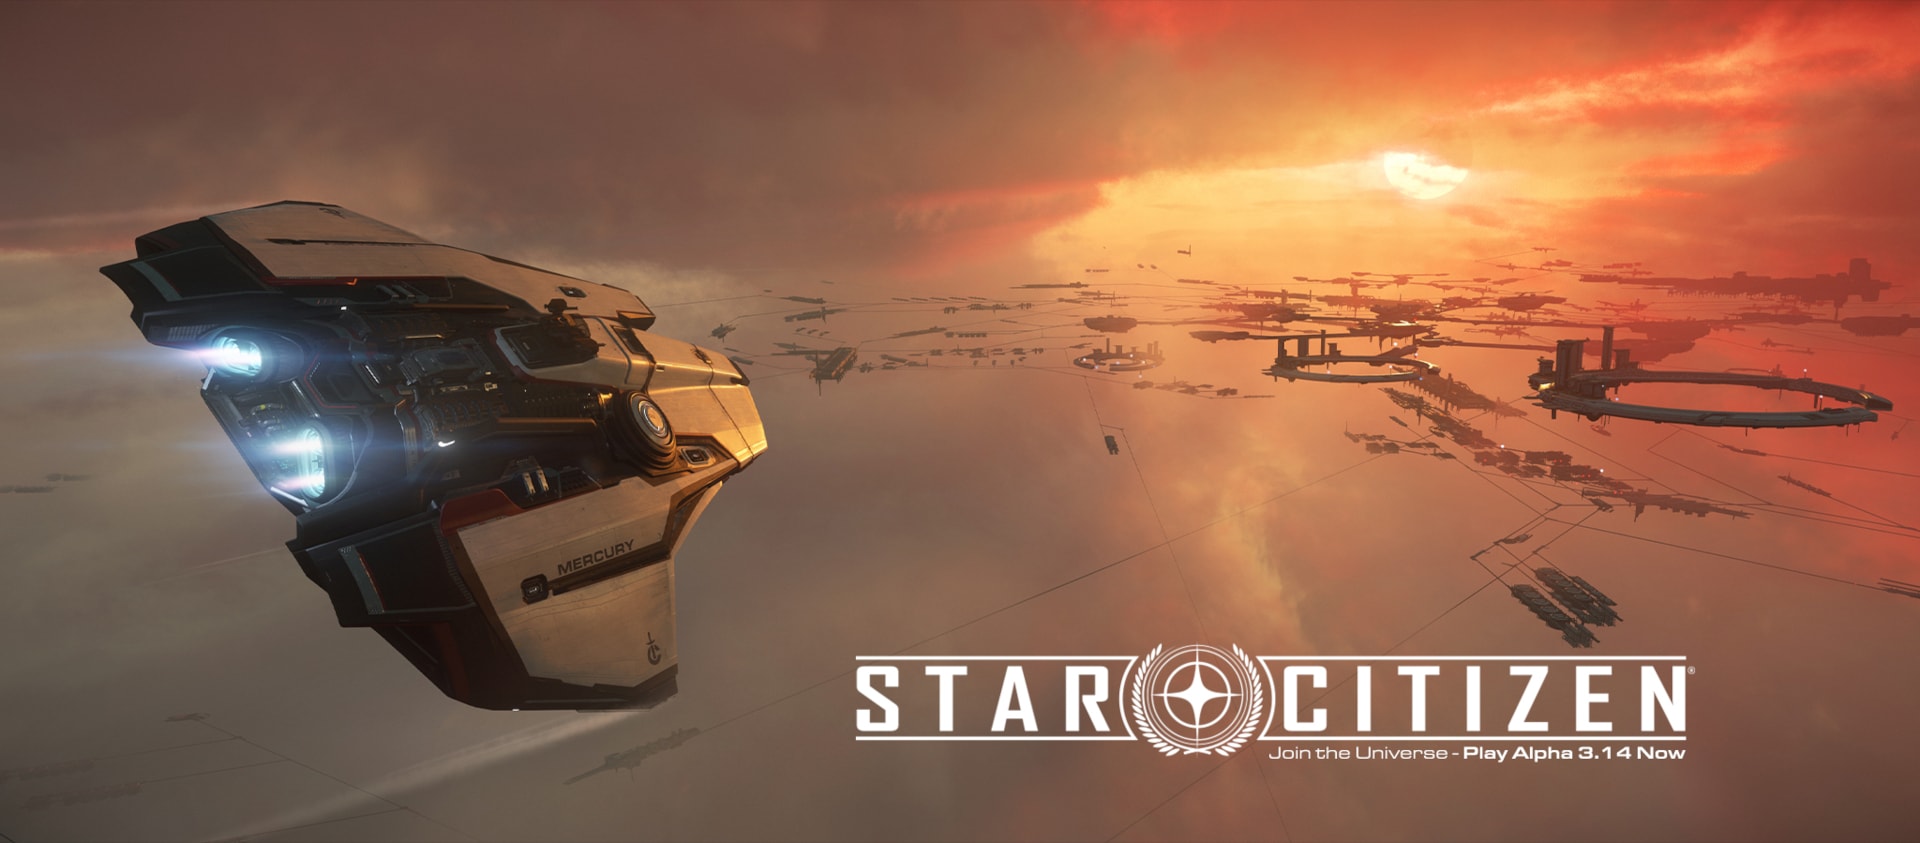 Star Citizen: A Space Trade/Combat Game, Now With a Gigantic Floating City  - autoevolution